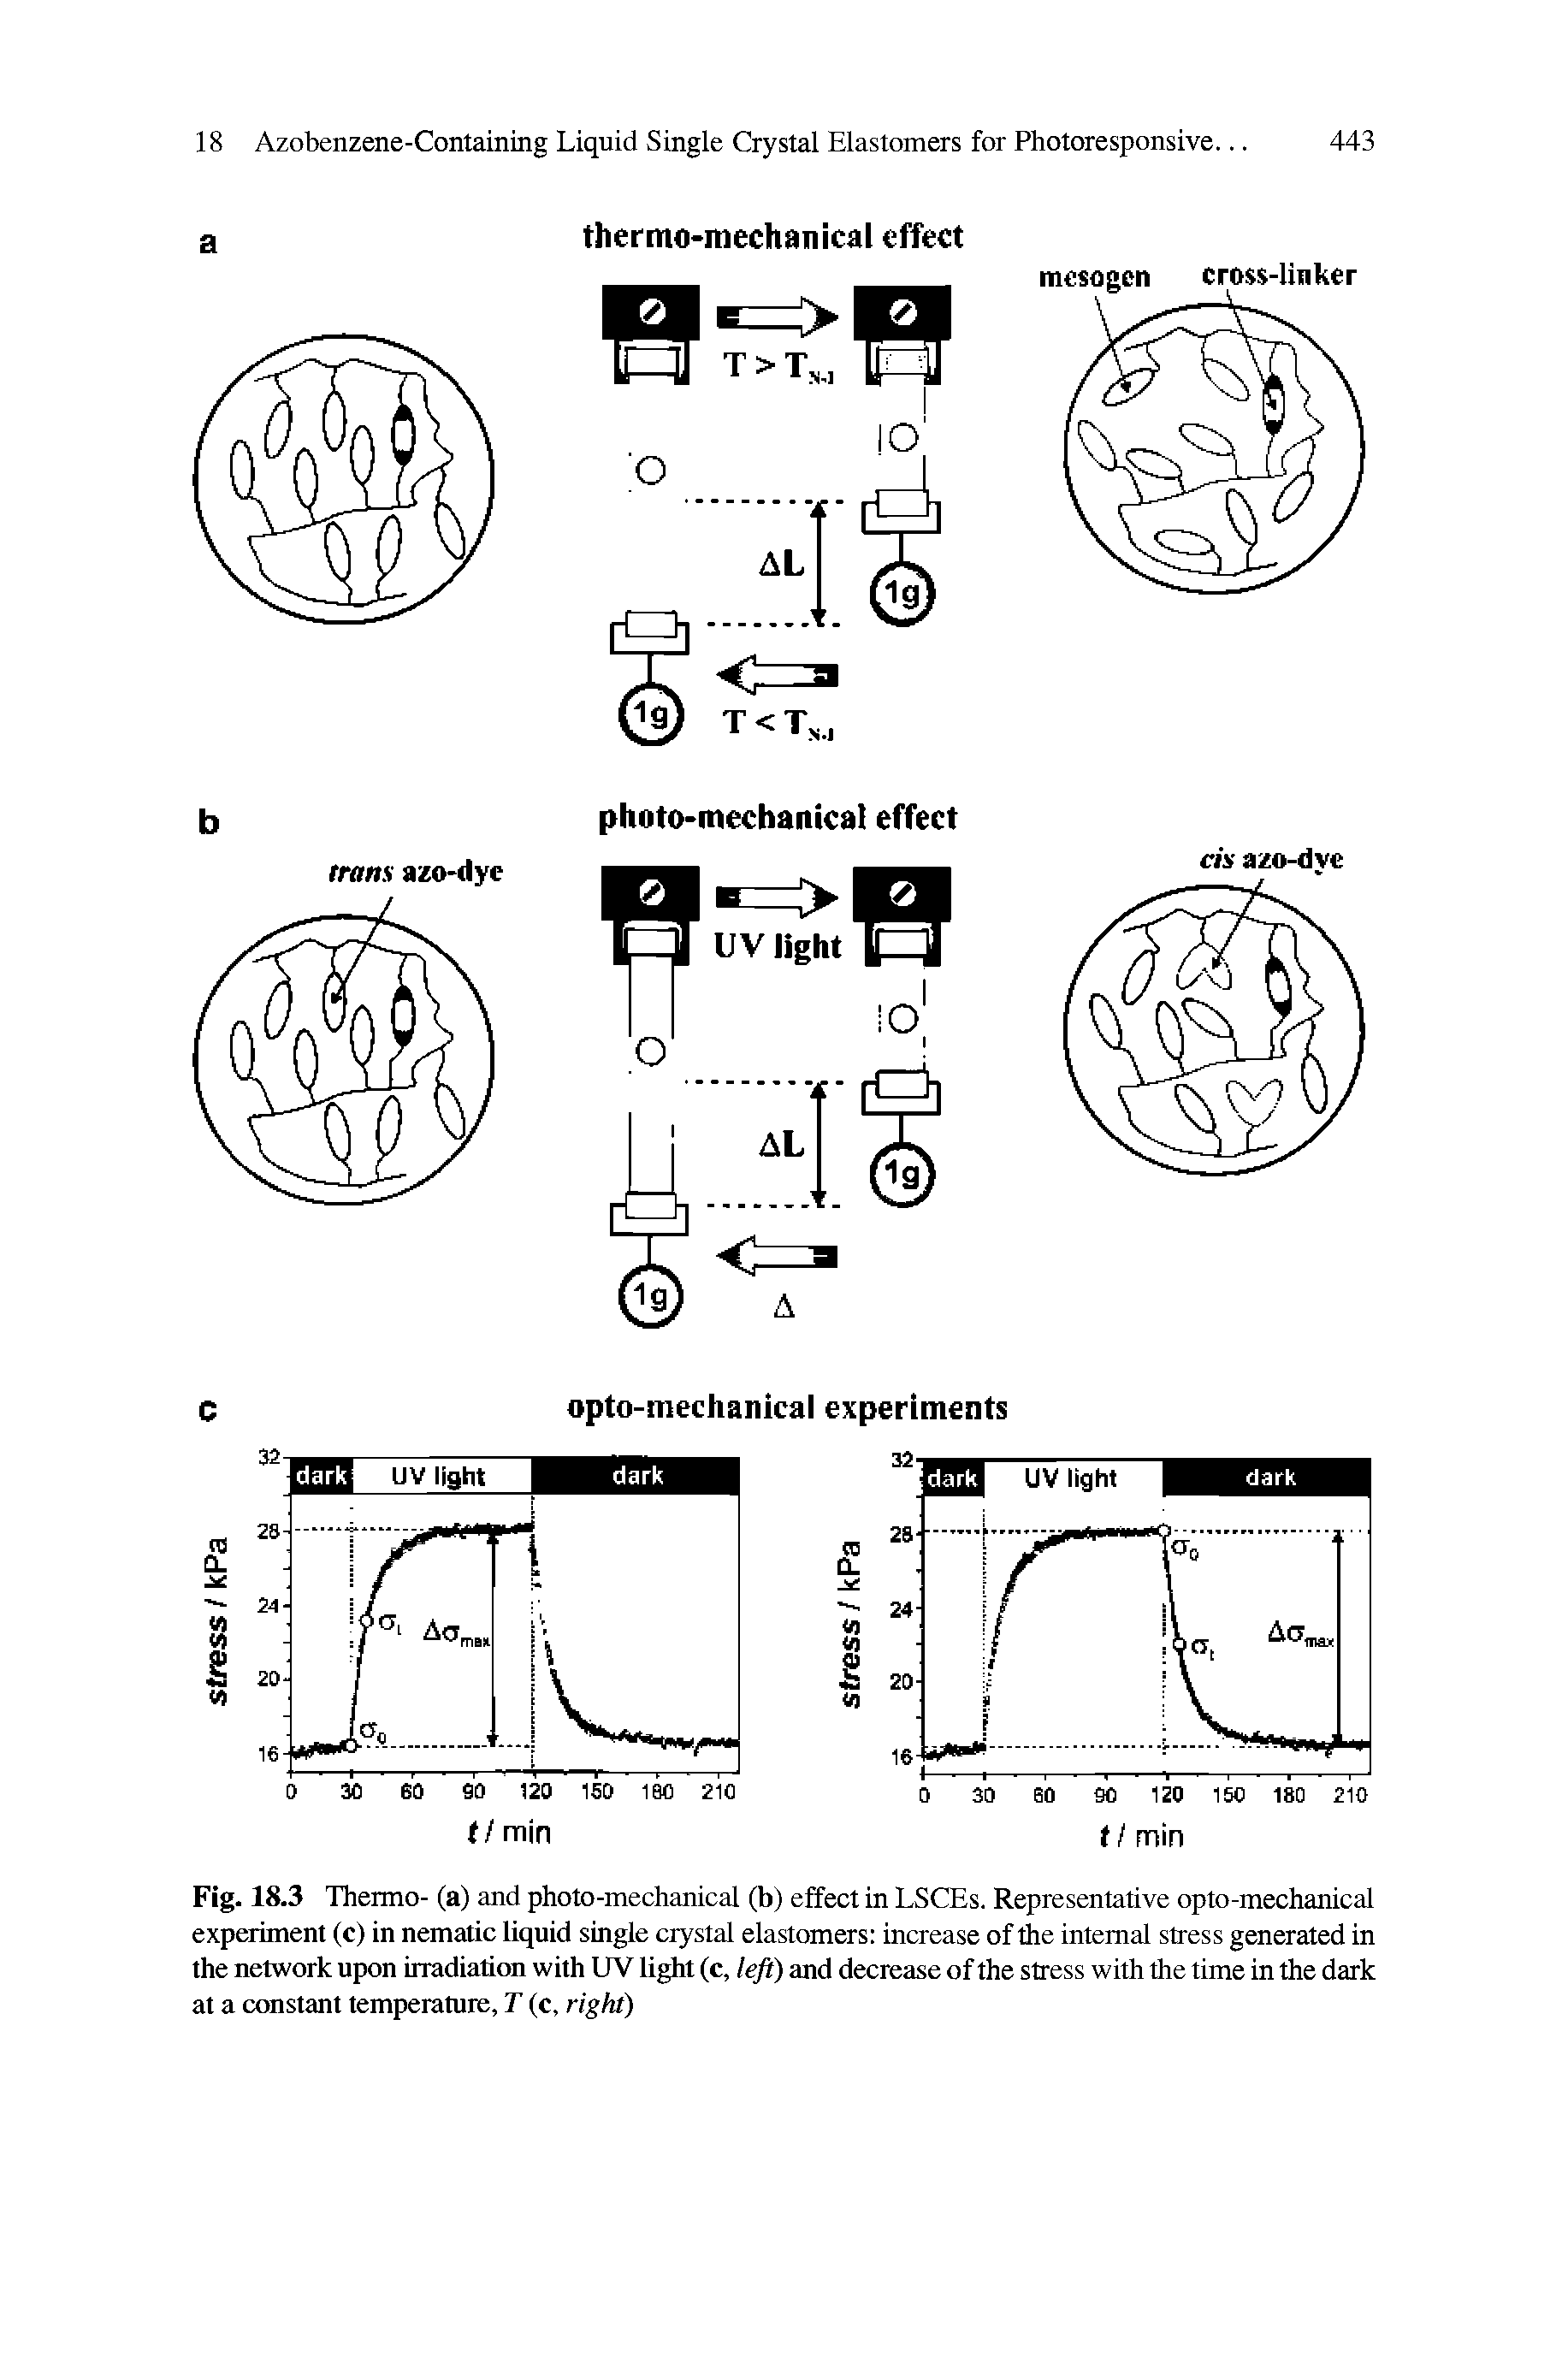 Fig. 18.3 Thermo- (a) and photo-mechanical (b) effect in LSCEs. Representative opto-mechanical experiment (c) in nematic liquid single crystal elastomers increase of the internal stress generated in the network upon irradiation with UV light (c, left) and decrease of the stress with the time in the dark at a constant temperature, T (c, right)...